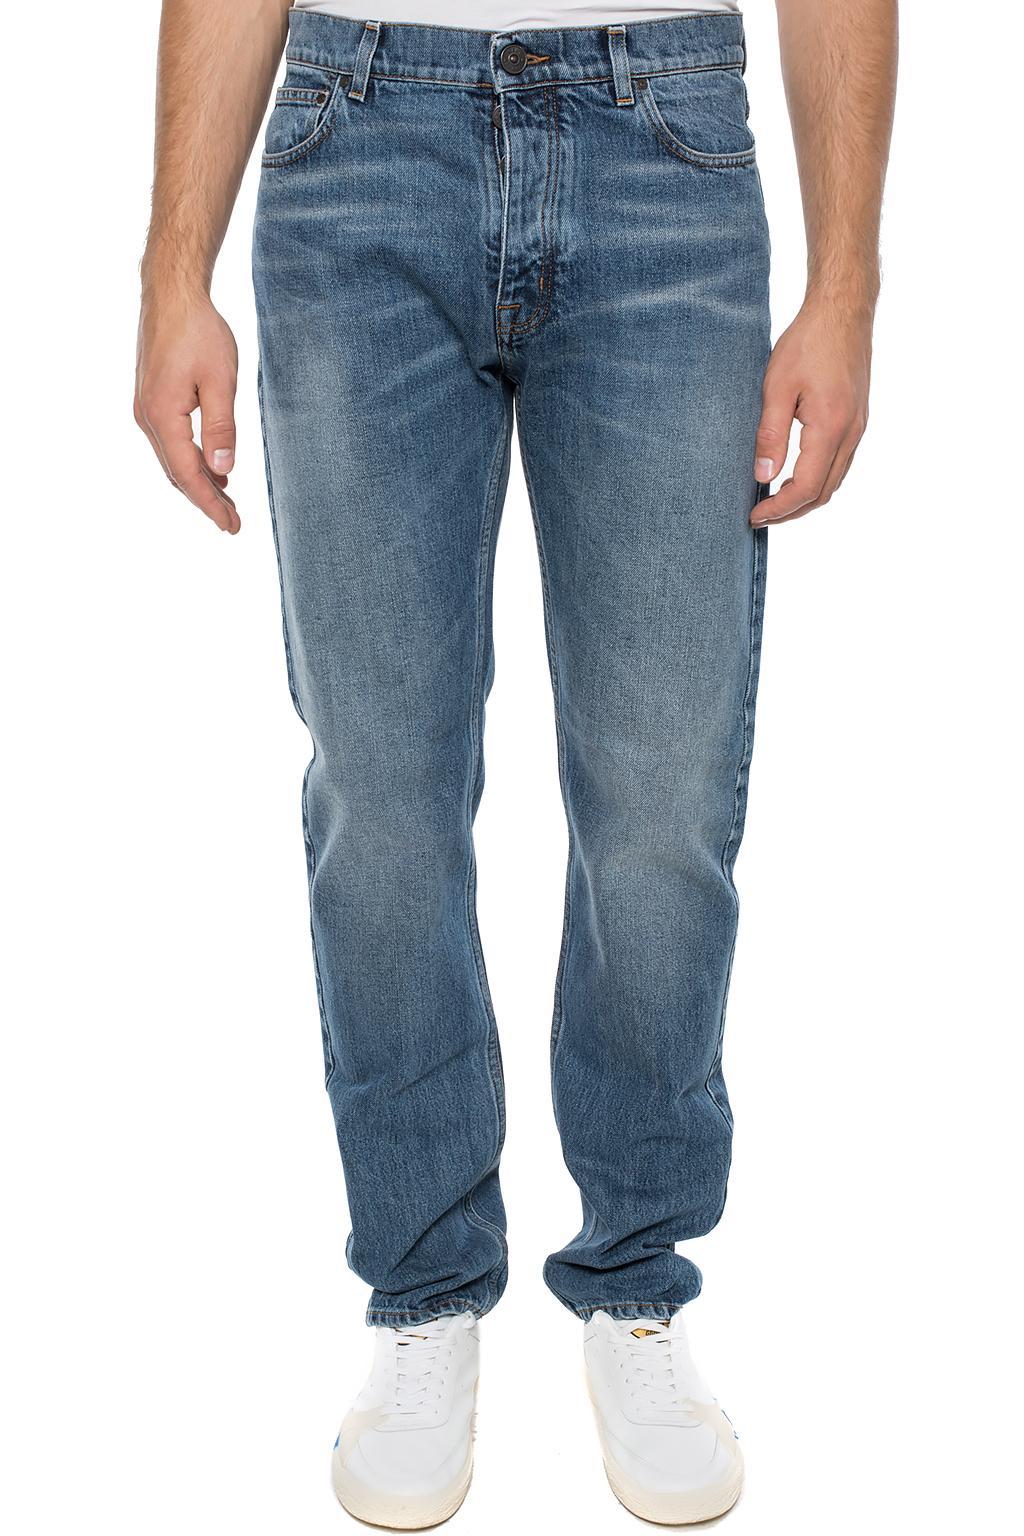 Kent & Curwen Denim Jeans With Tears in Blue for Men - Lyst